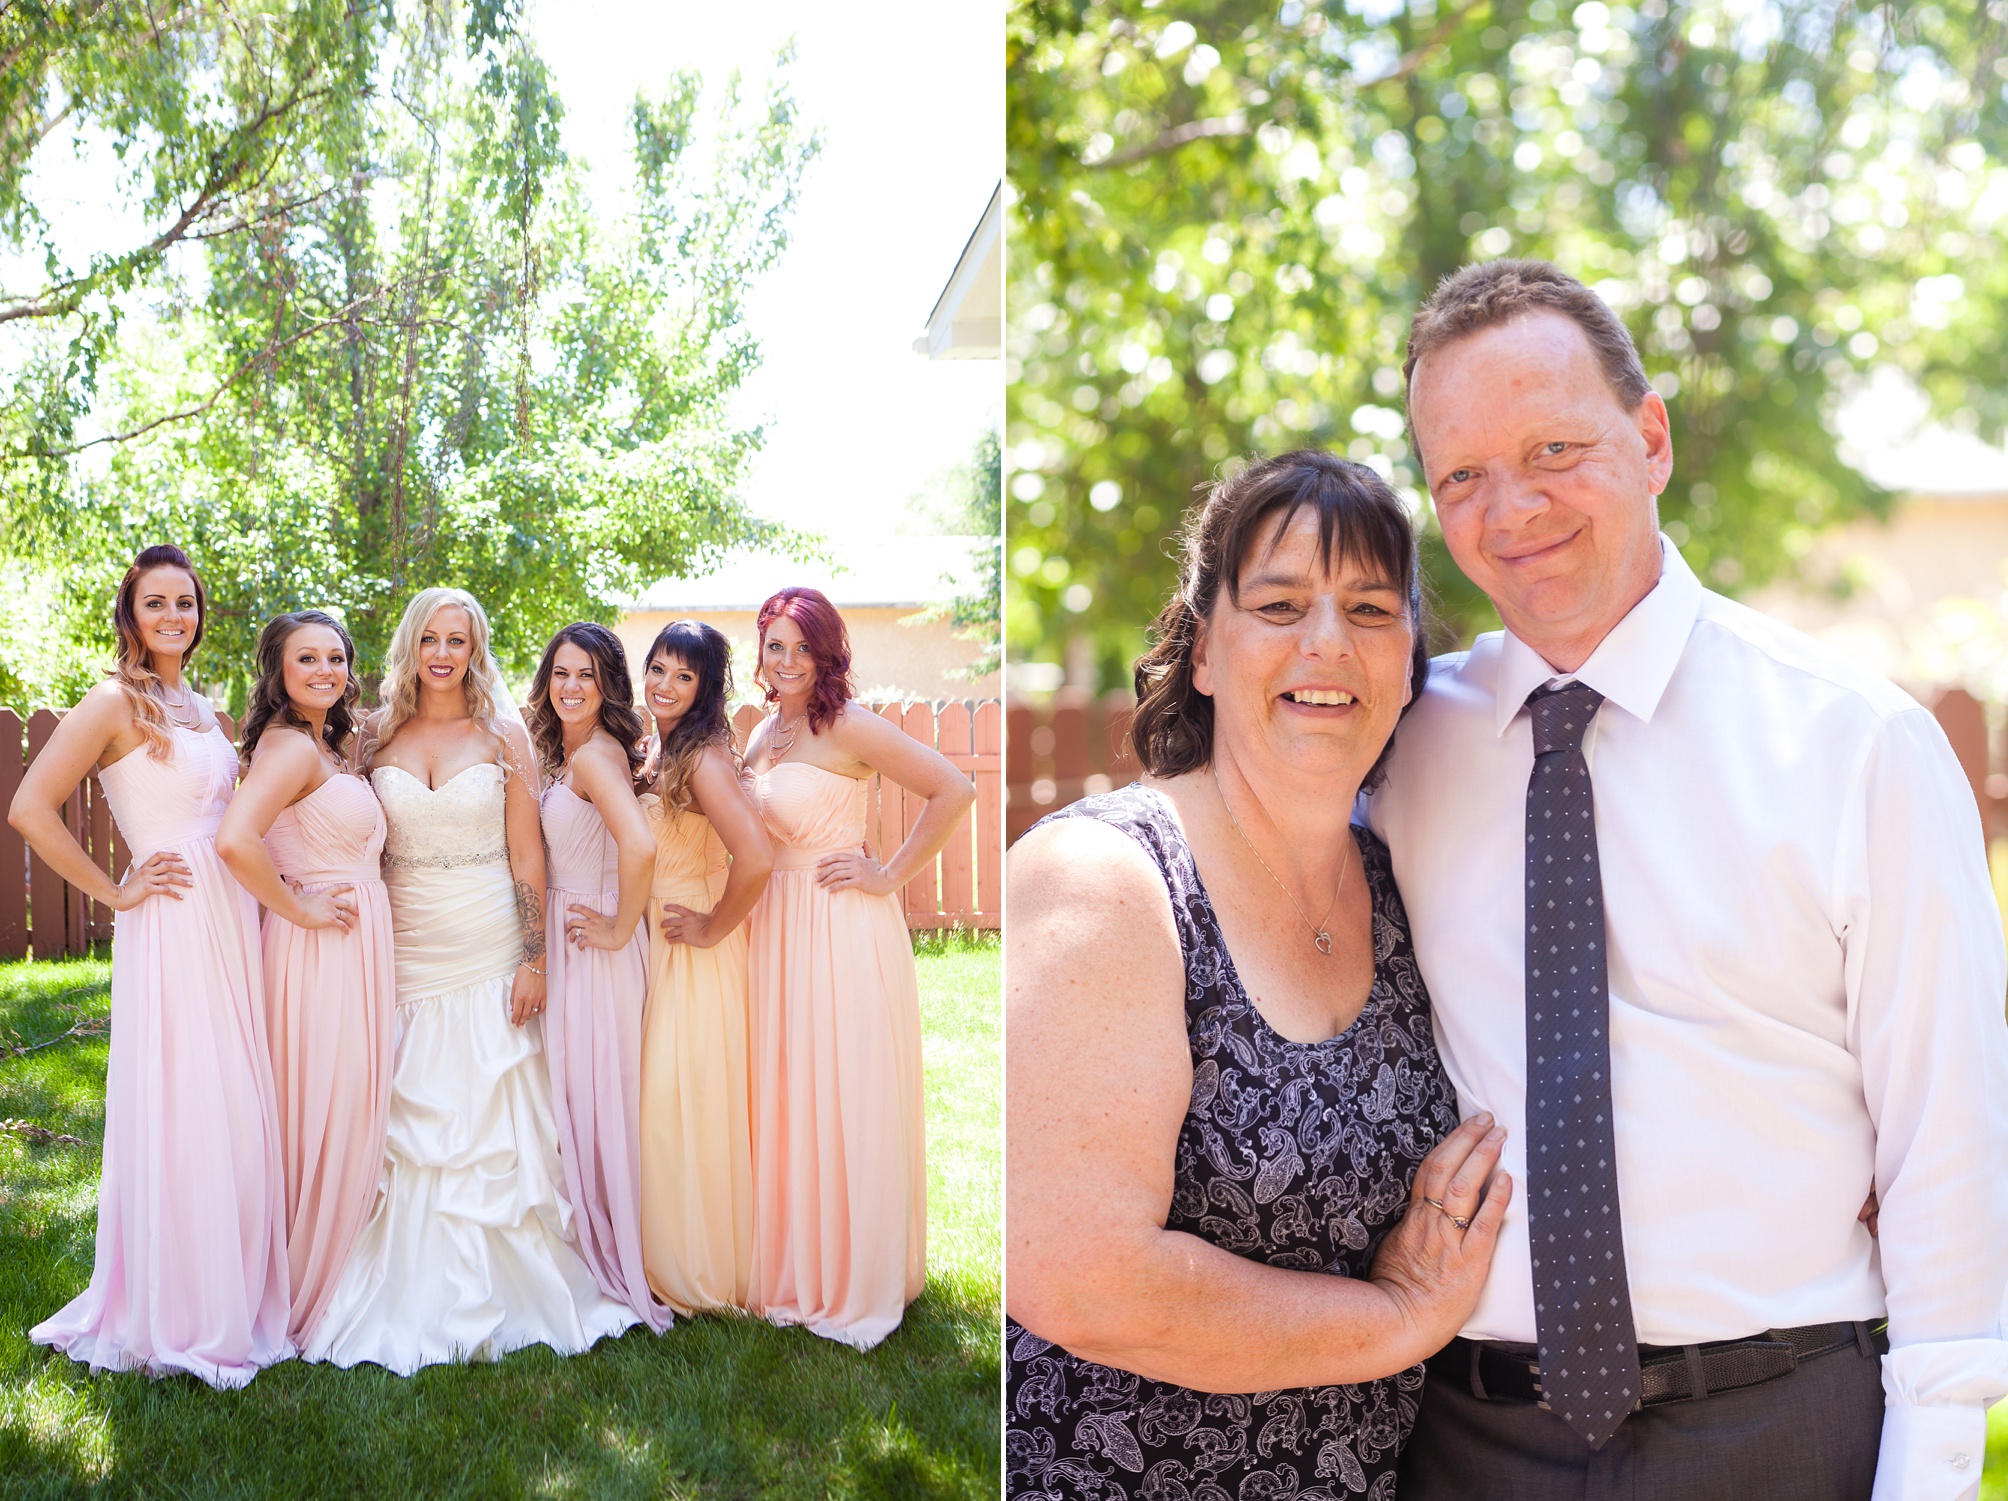 Bridesmaid dresses in shades of pink and coral, Kinsey Holt Photography